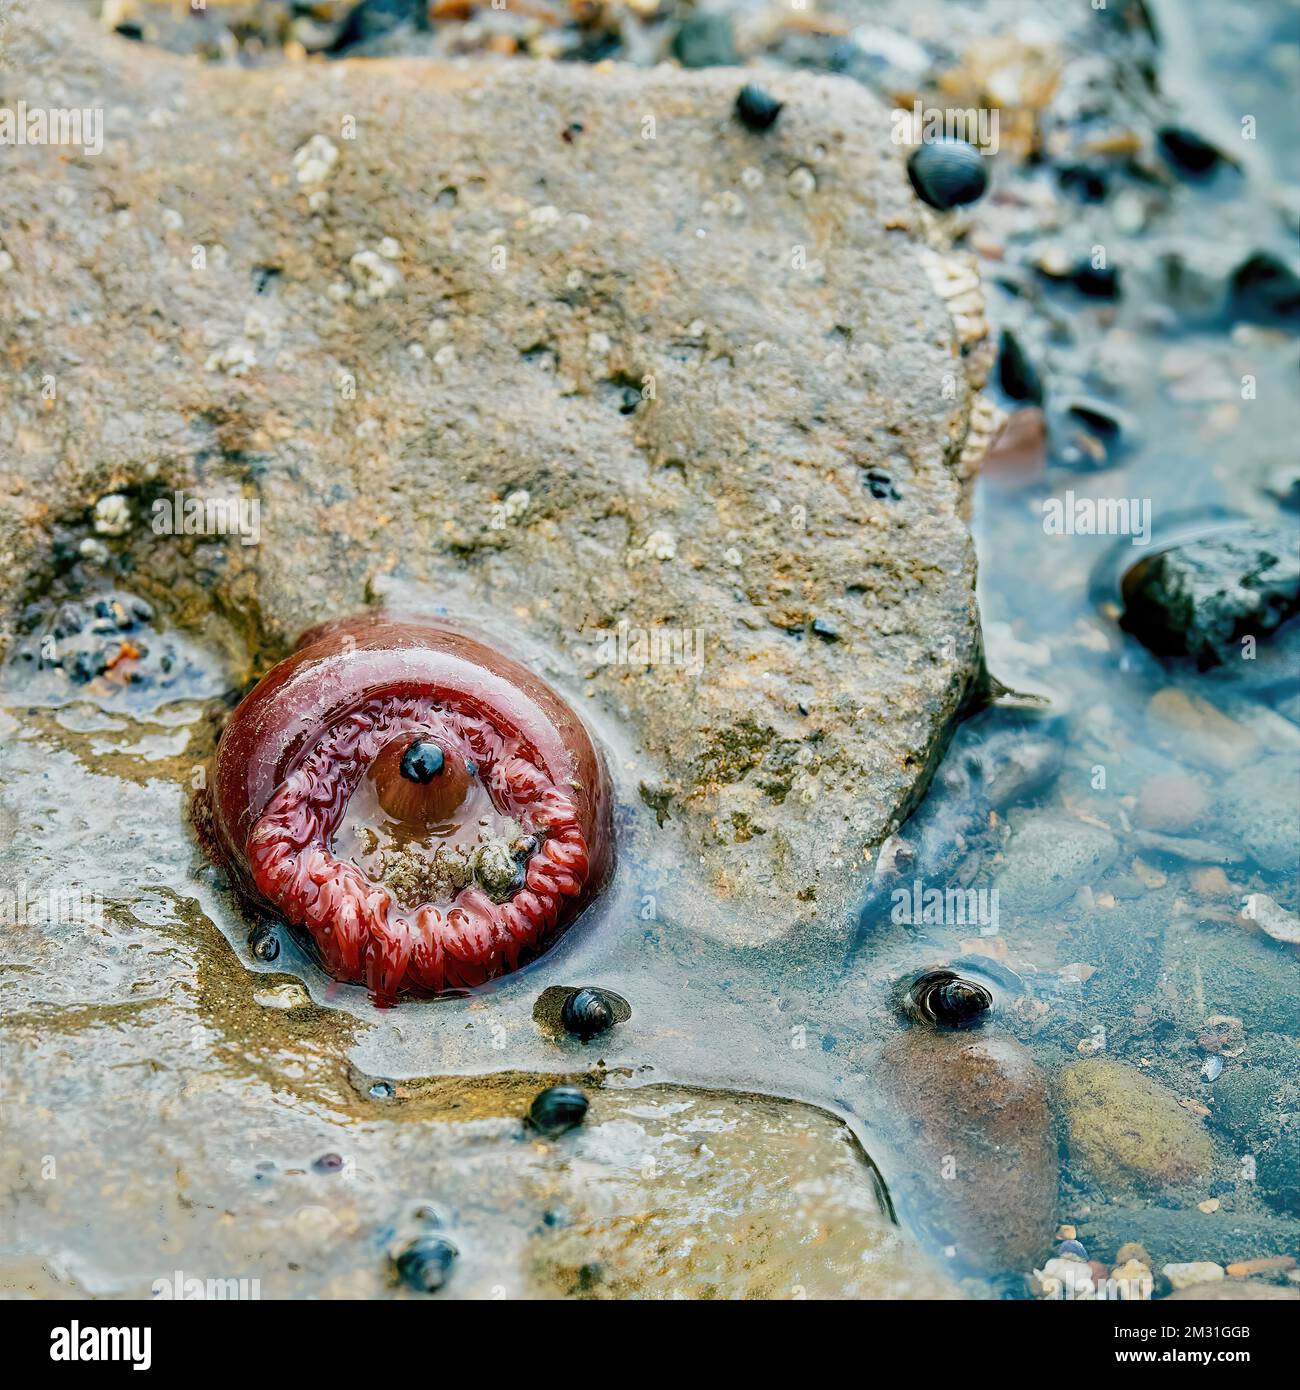 A survivor of the mass marine die off - a beadlet anemone on the intertidal zone sands of Redcar Beach. Stock Photo